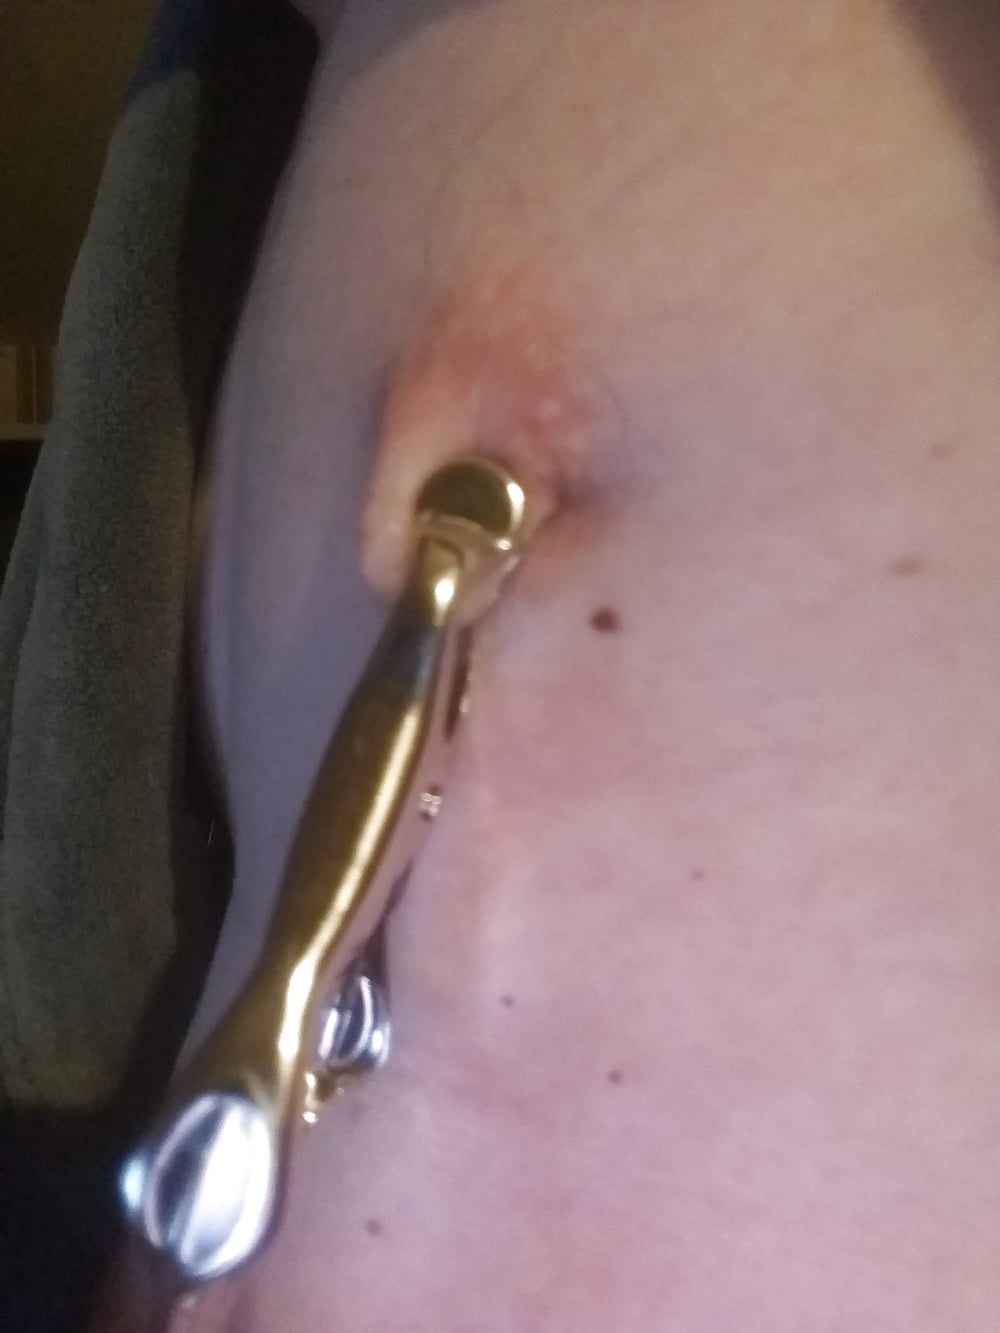 Nippleplay with Clamps #8